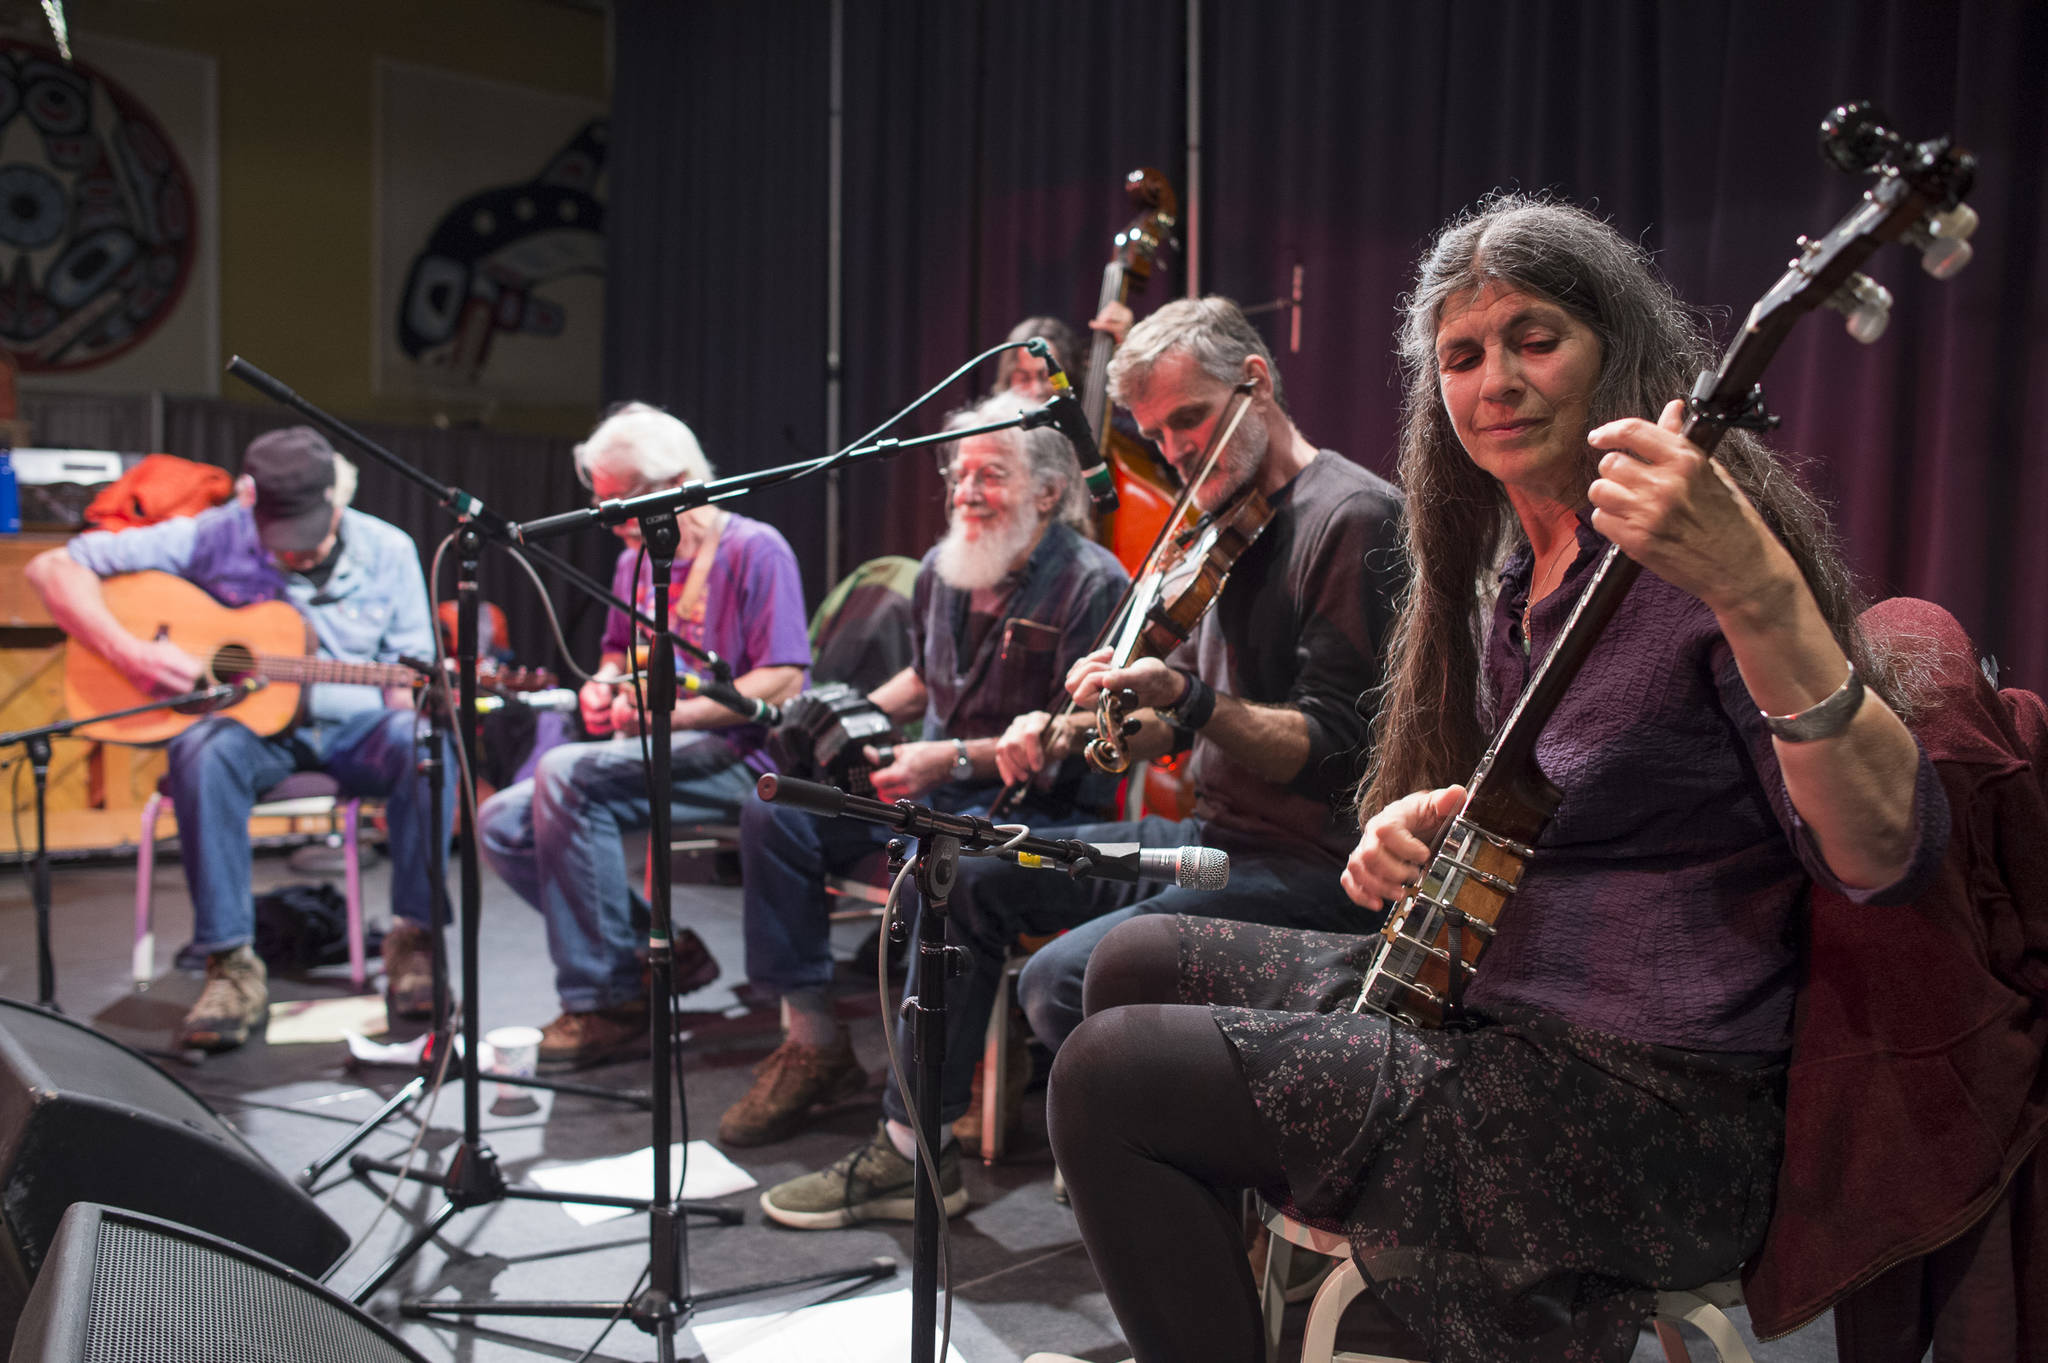 Sweet Sunny North of Port Townsend plays a contra dance at the Alaska Folk Festival at the Juneau Arts and Culture Center on Thursday, April 11, 2019. (Michael Penn | Juneau Empire)